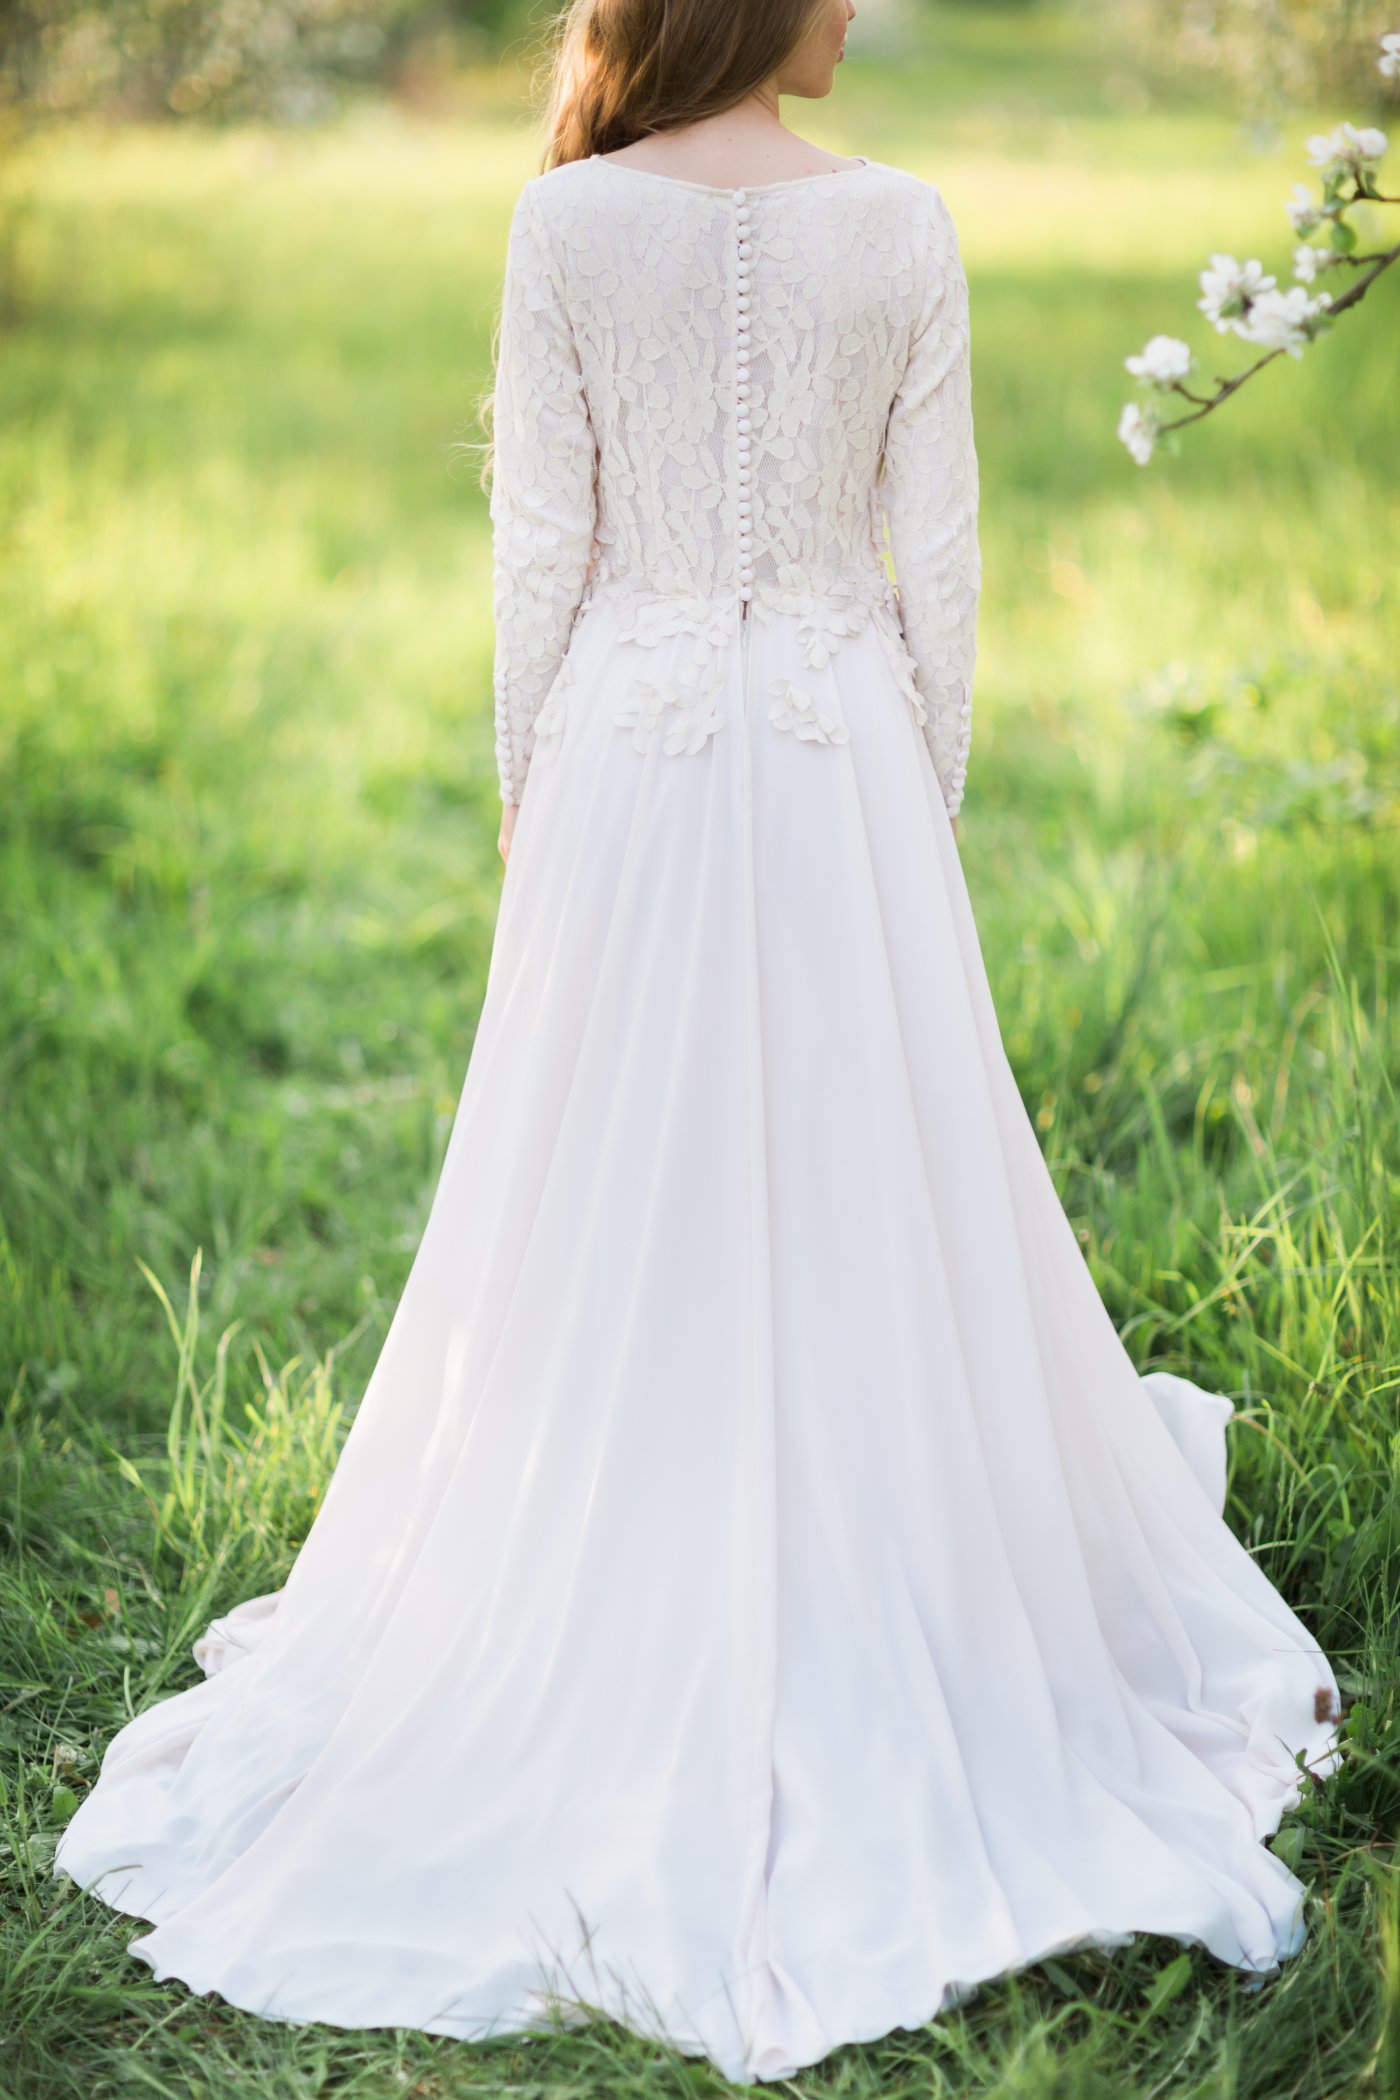 High-neck wedding dress with long sleeve and lace appliques floating ...